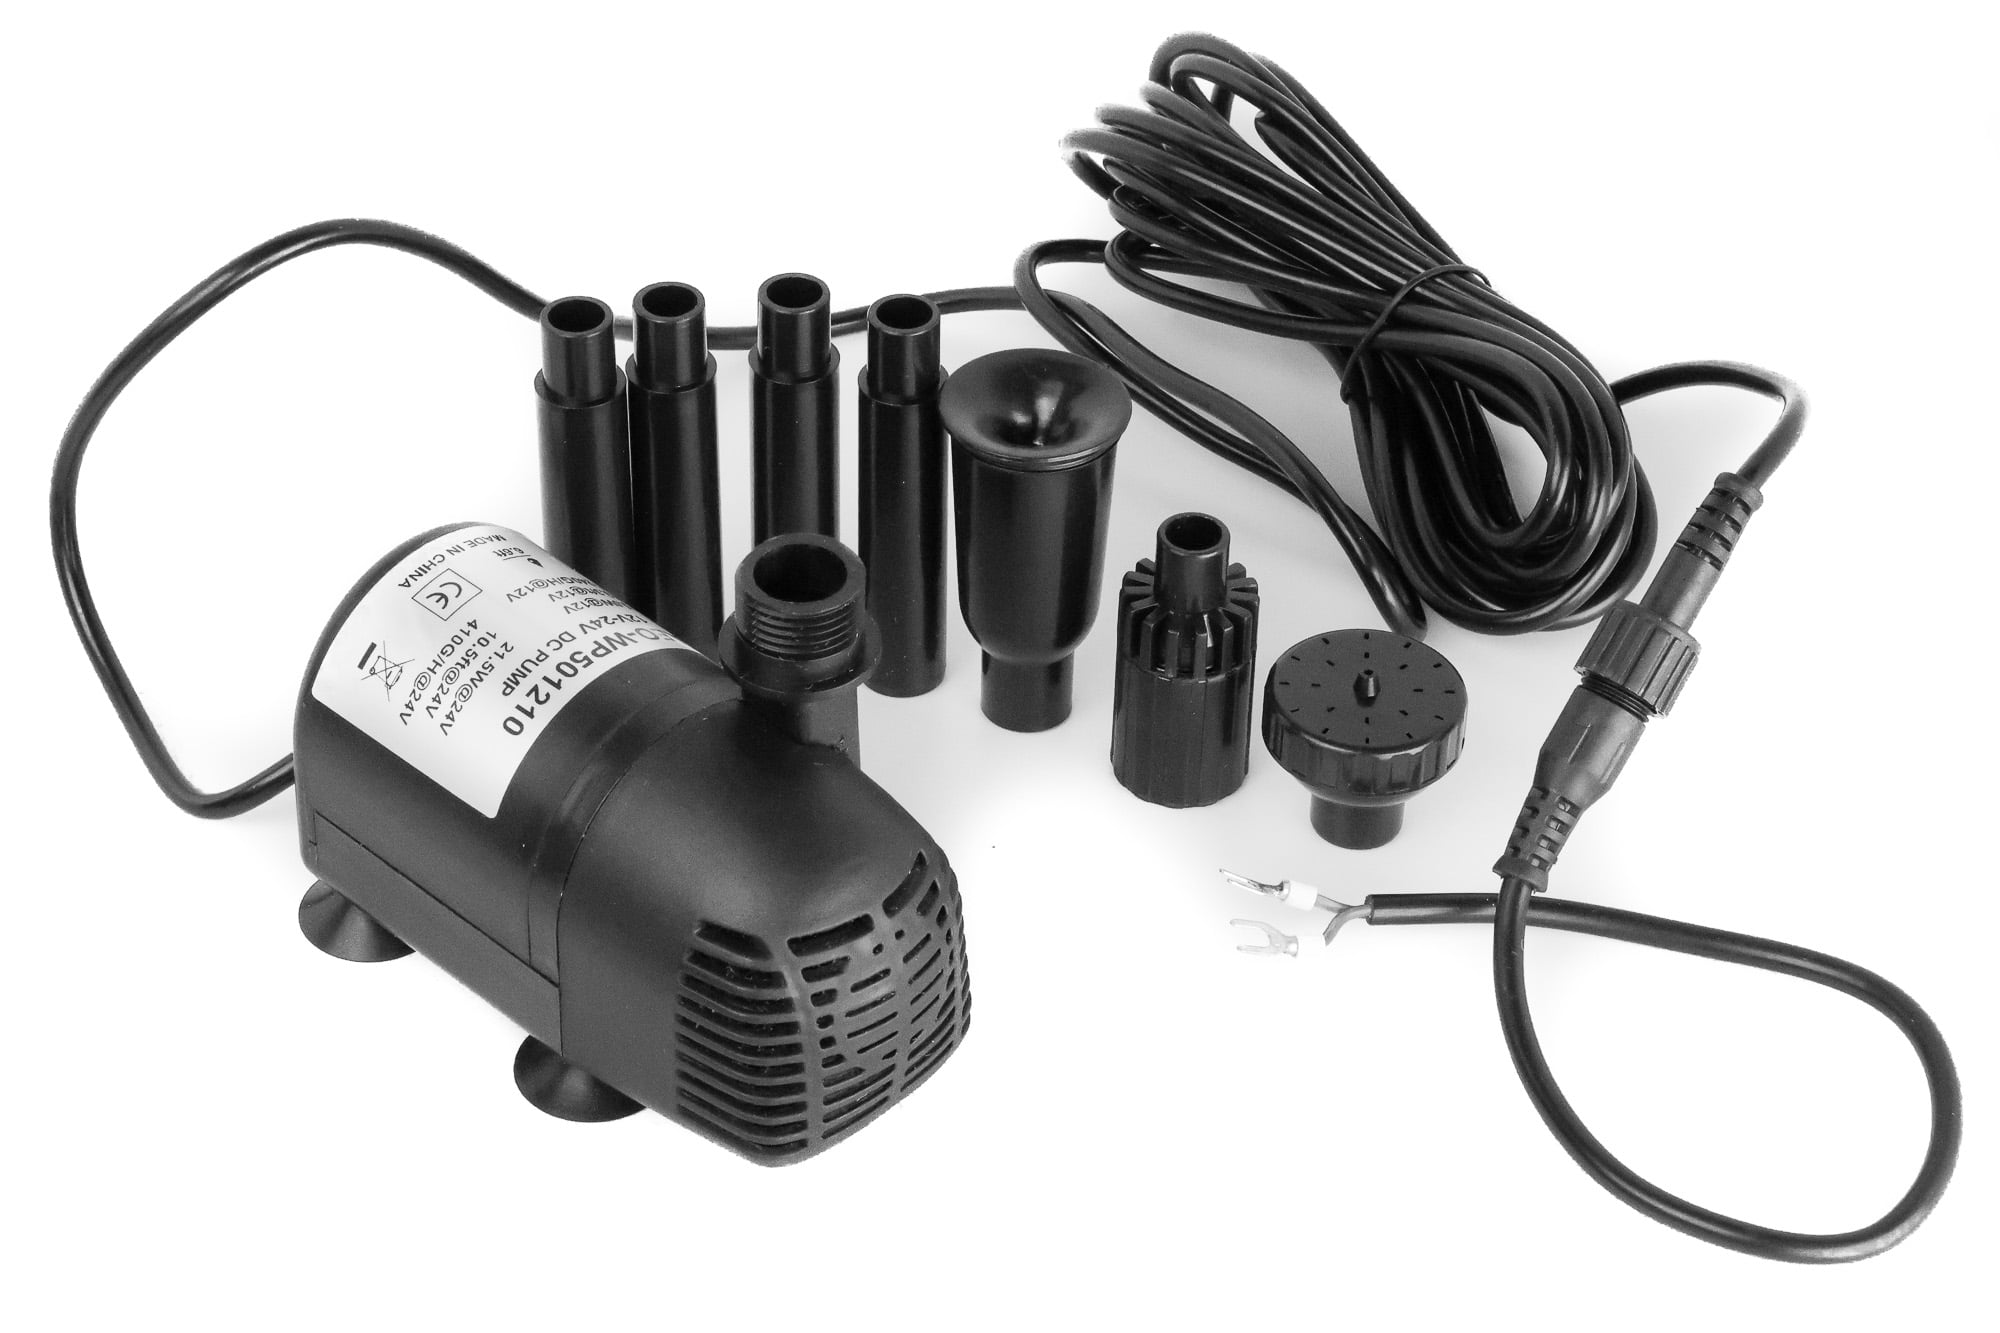 Submersible Water Pump 20W Low Noise With Filter Fountain Brushless Mini Pool Automatic Durable Aquarium Garden Pond DC 12V 